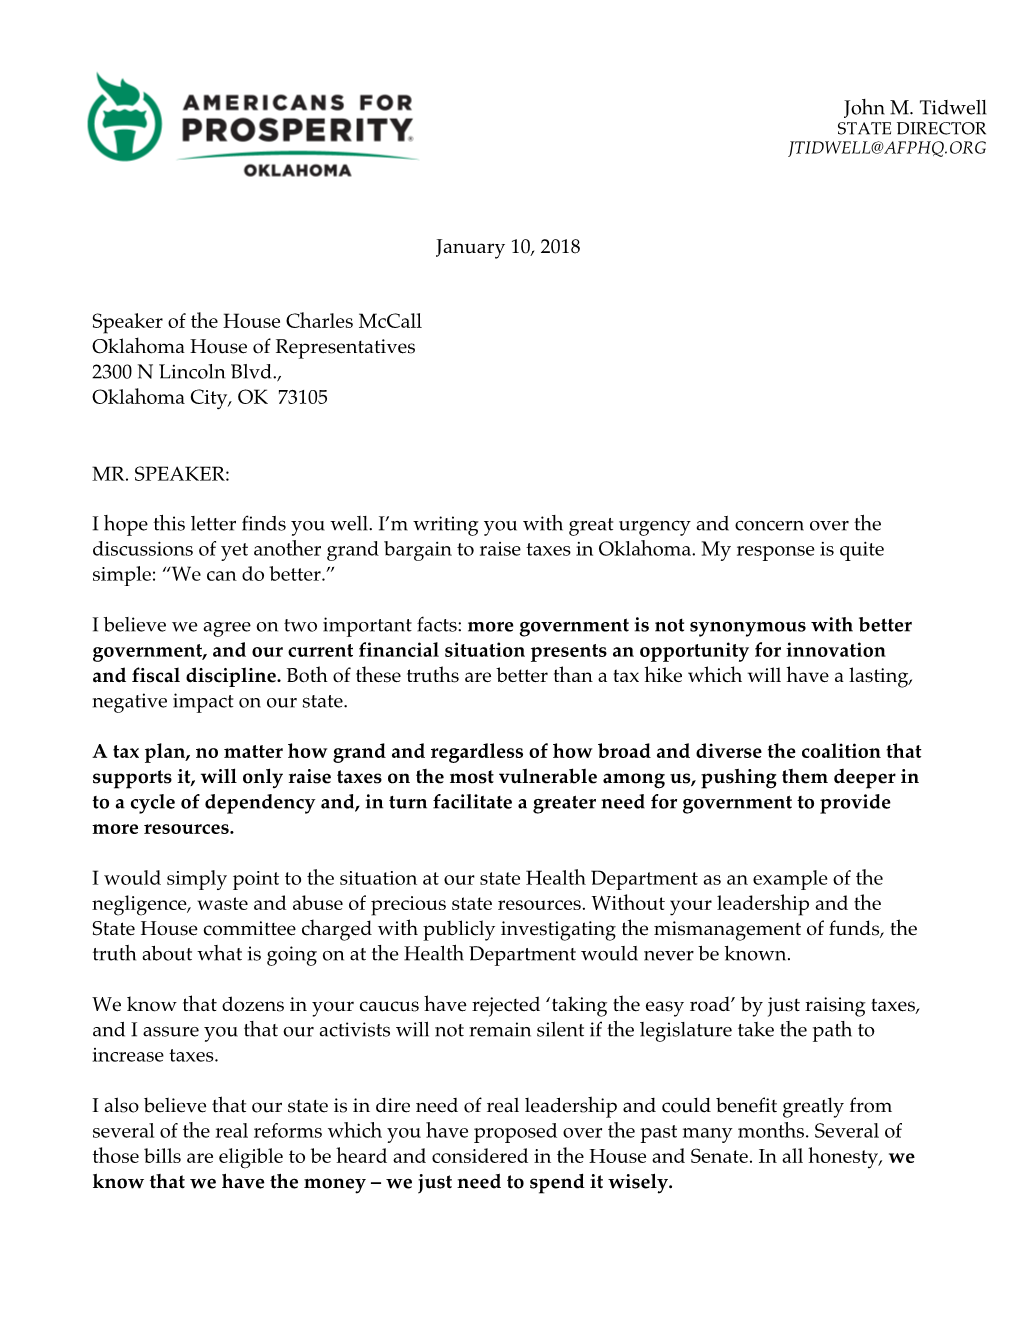 Mccall Letter on Taxes 01102018